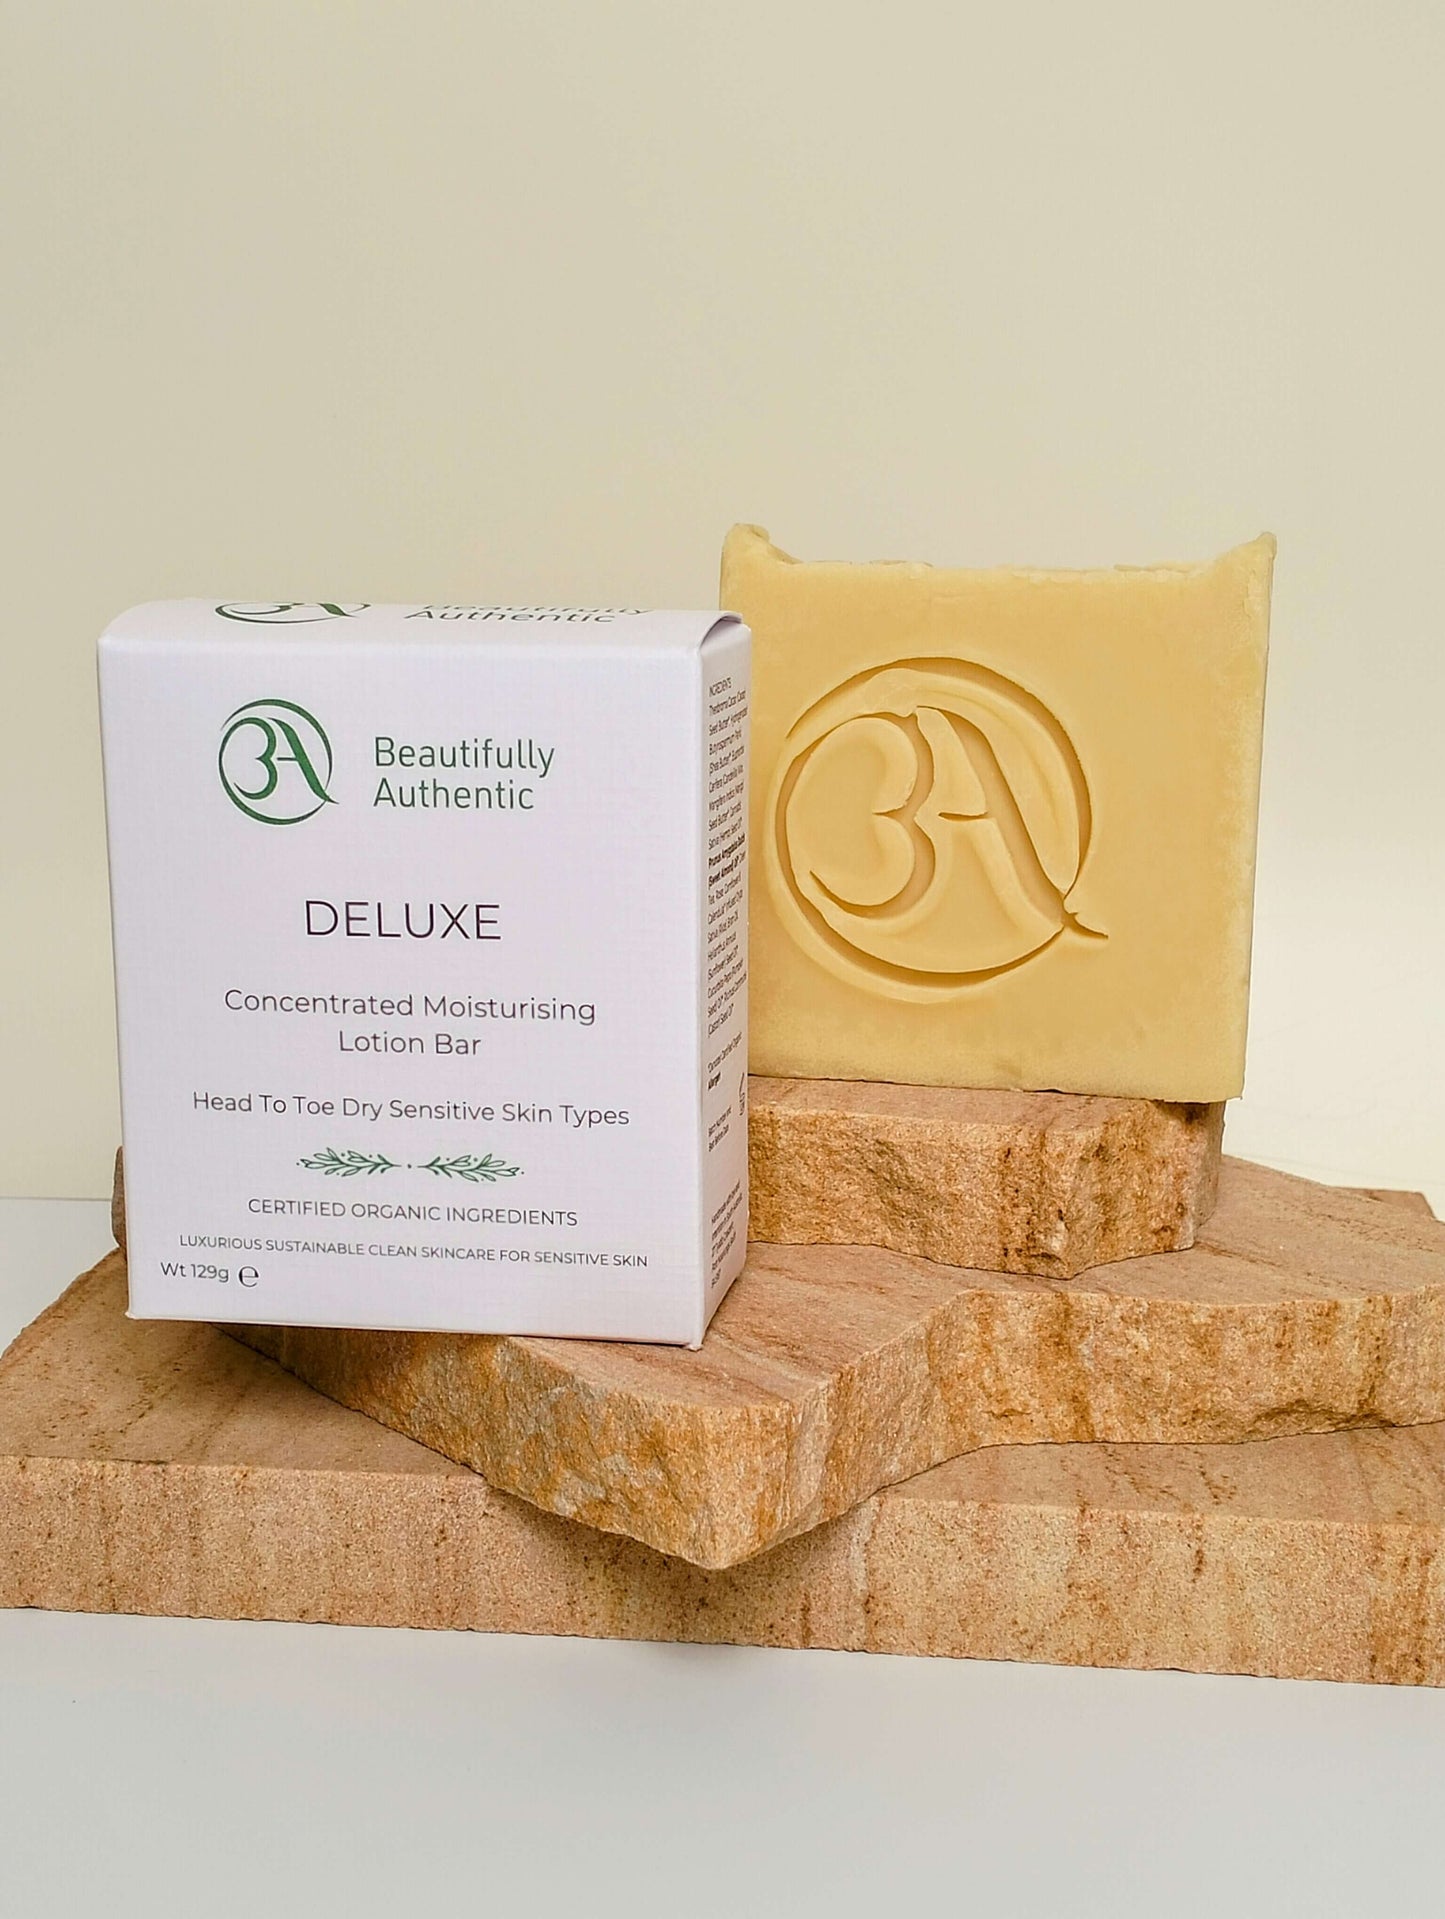 Deluxe Concentrated Moisturising Lotion Bar For Dry Sensitive Skin